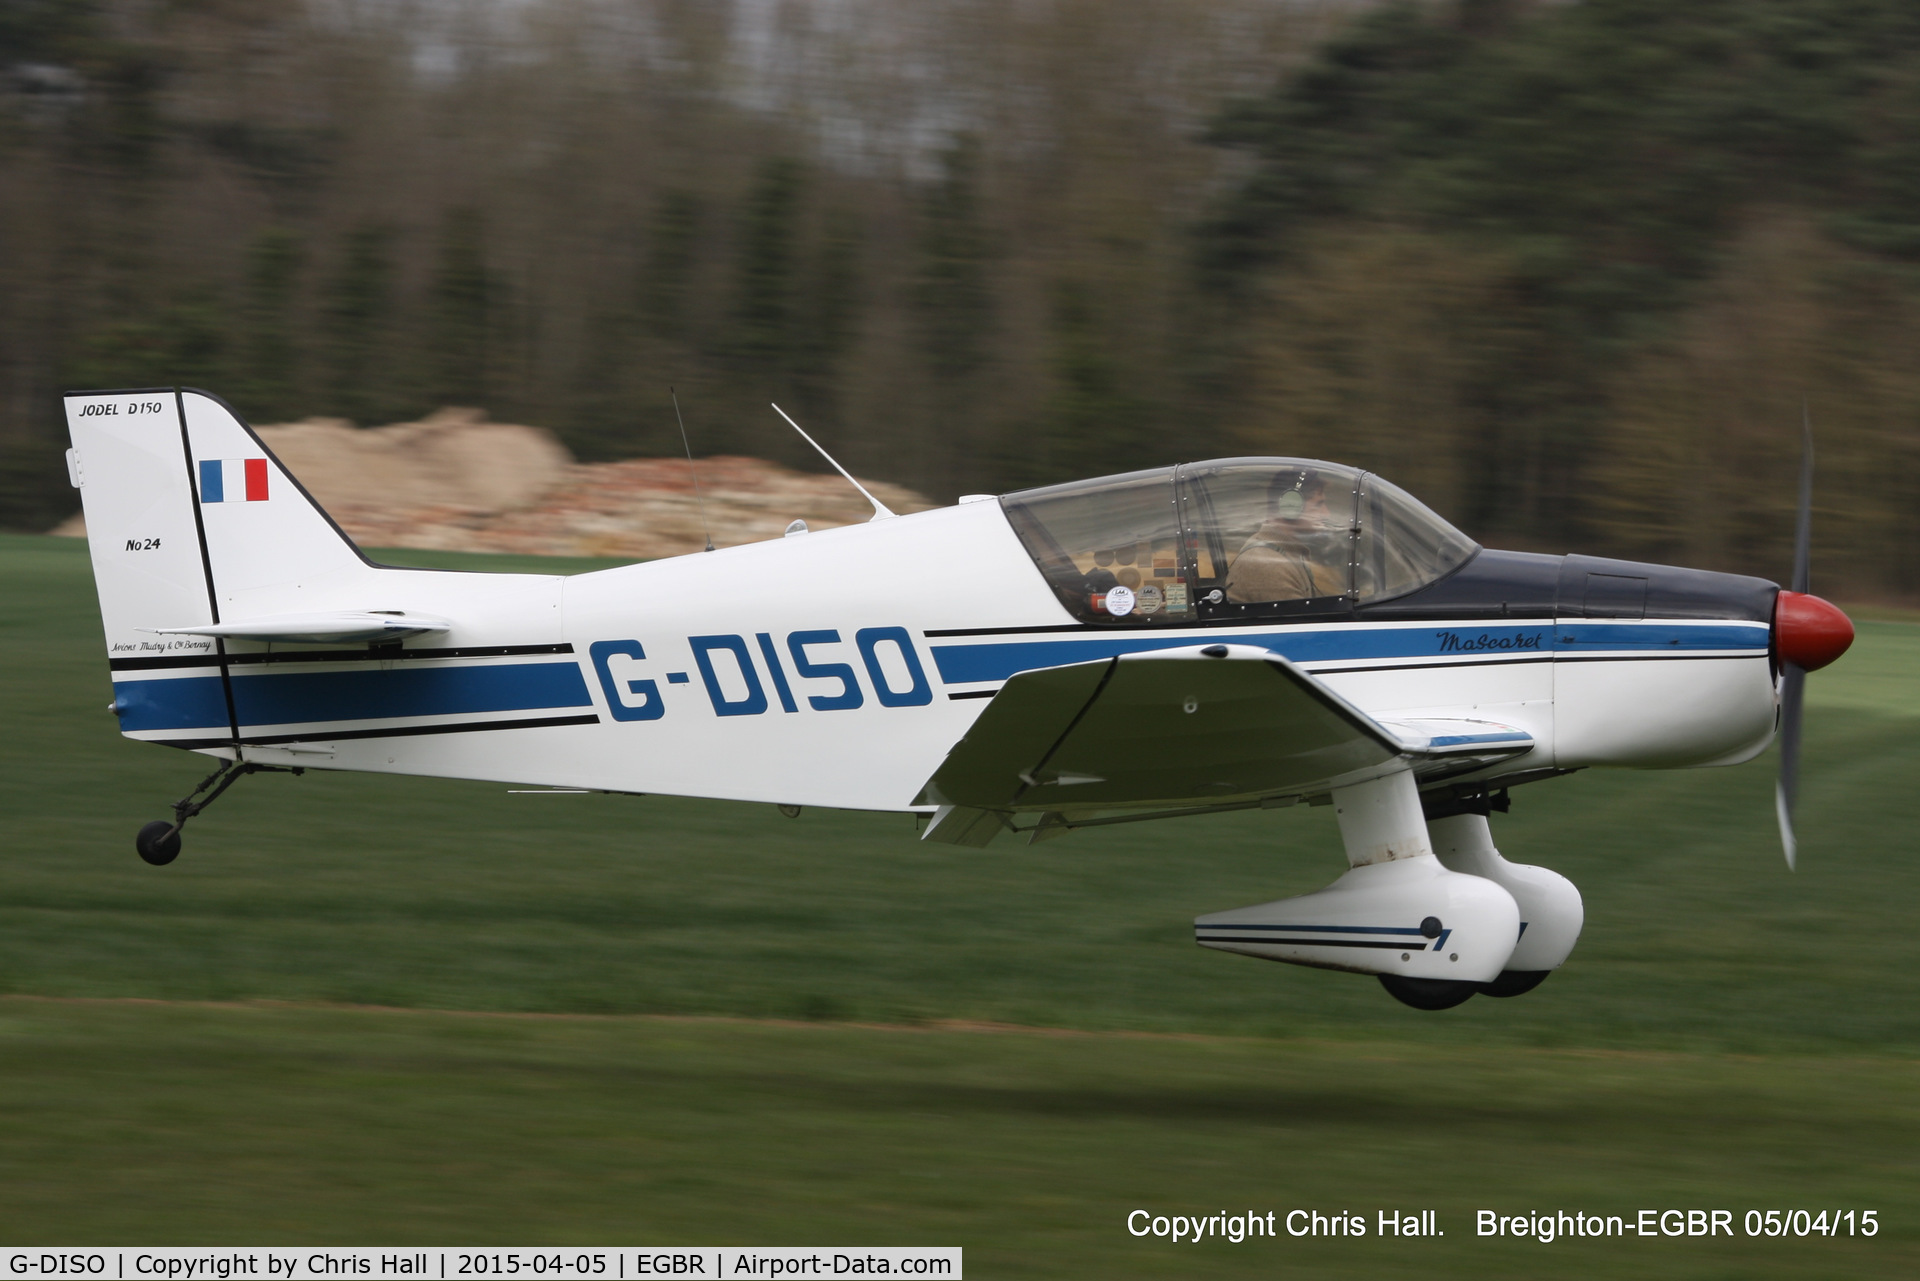 G-DISO, 1963 SAN Jodel D-150 Mascaret C/N 24, at the Easter Homebuilt Aircraft Fly-in